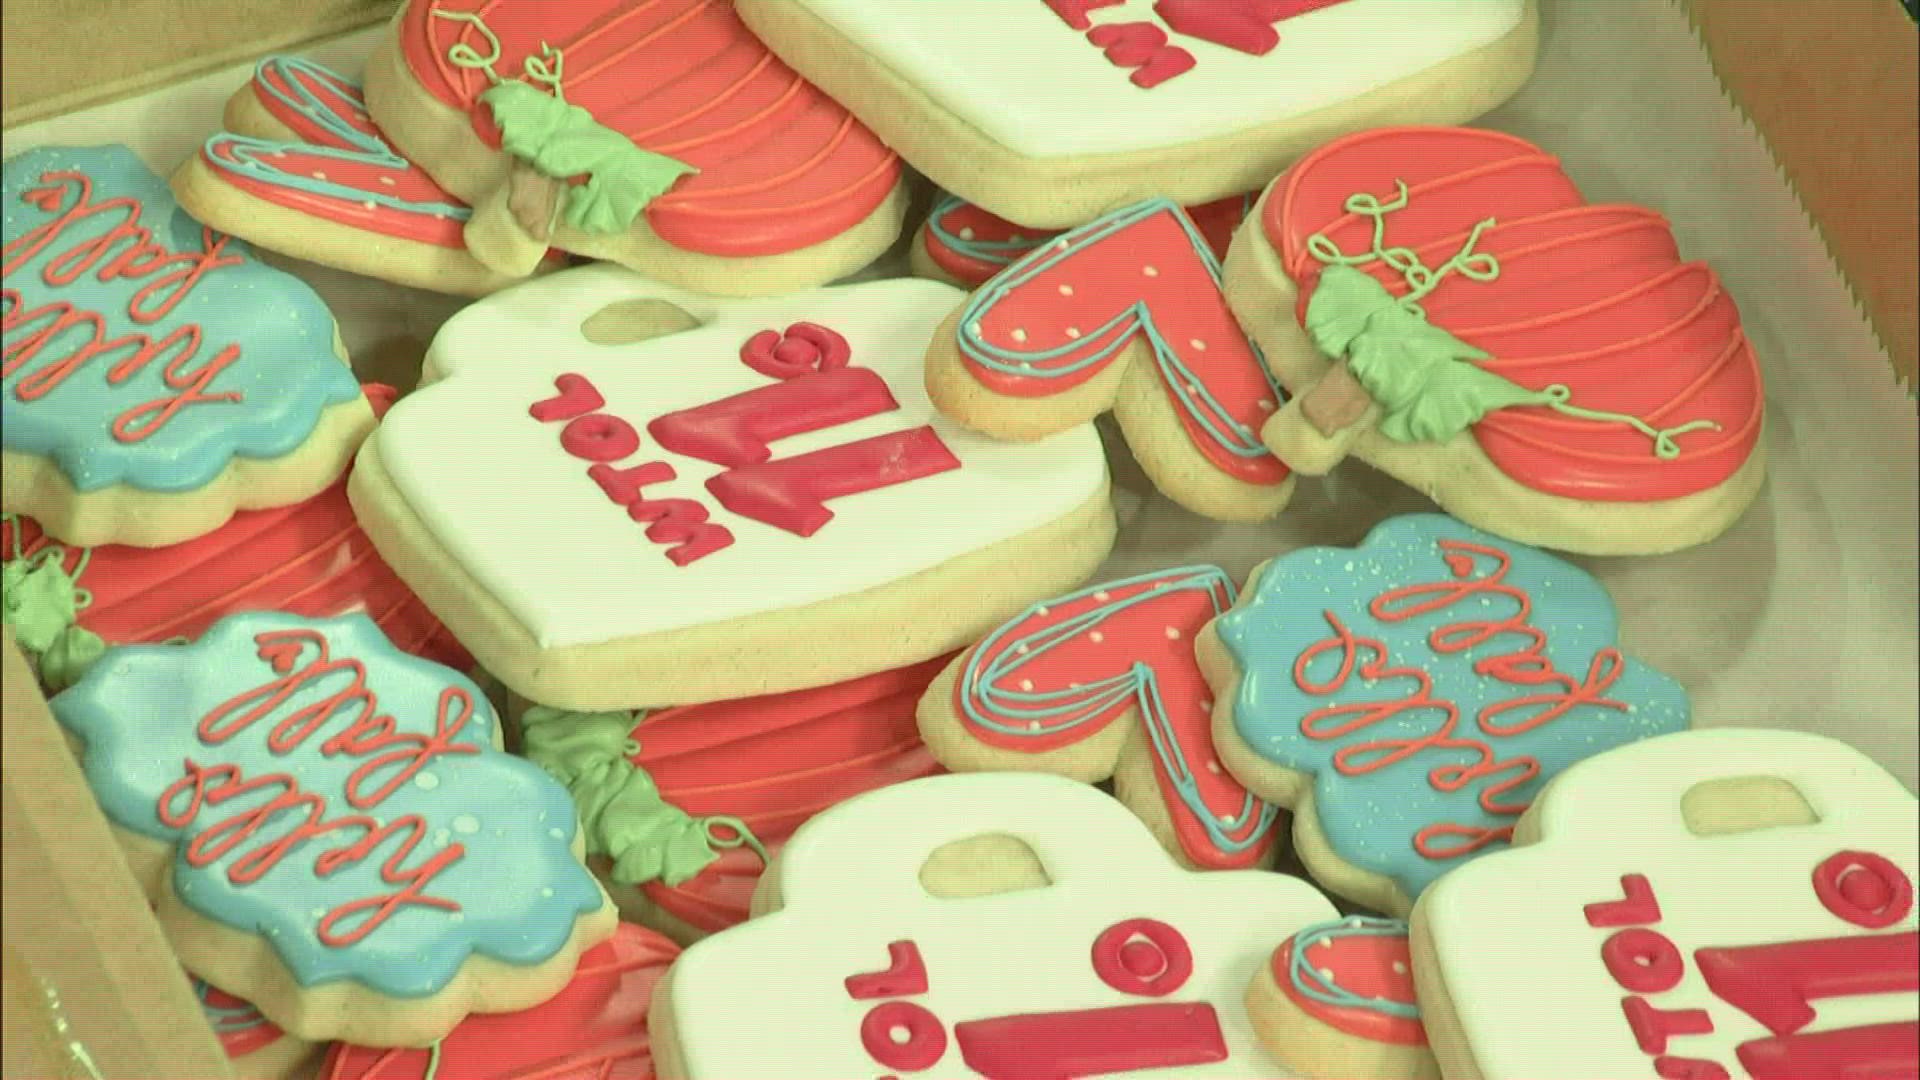 Emily Waidelich, of "Emily's Custom Cookies" located in Weston, OH, joins WTOL 11 for their first “Bake Off” segment. She brings the treats and tools to remake her d